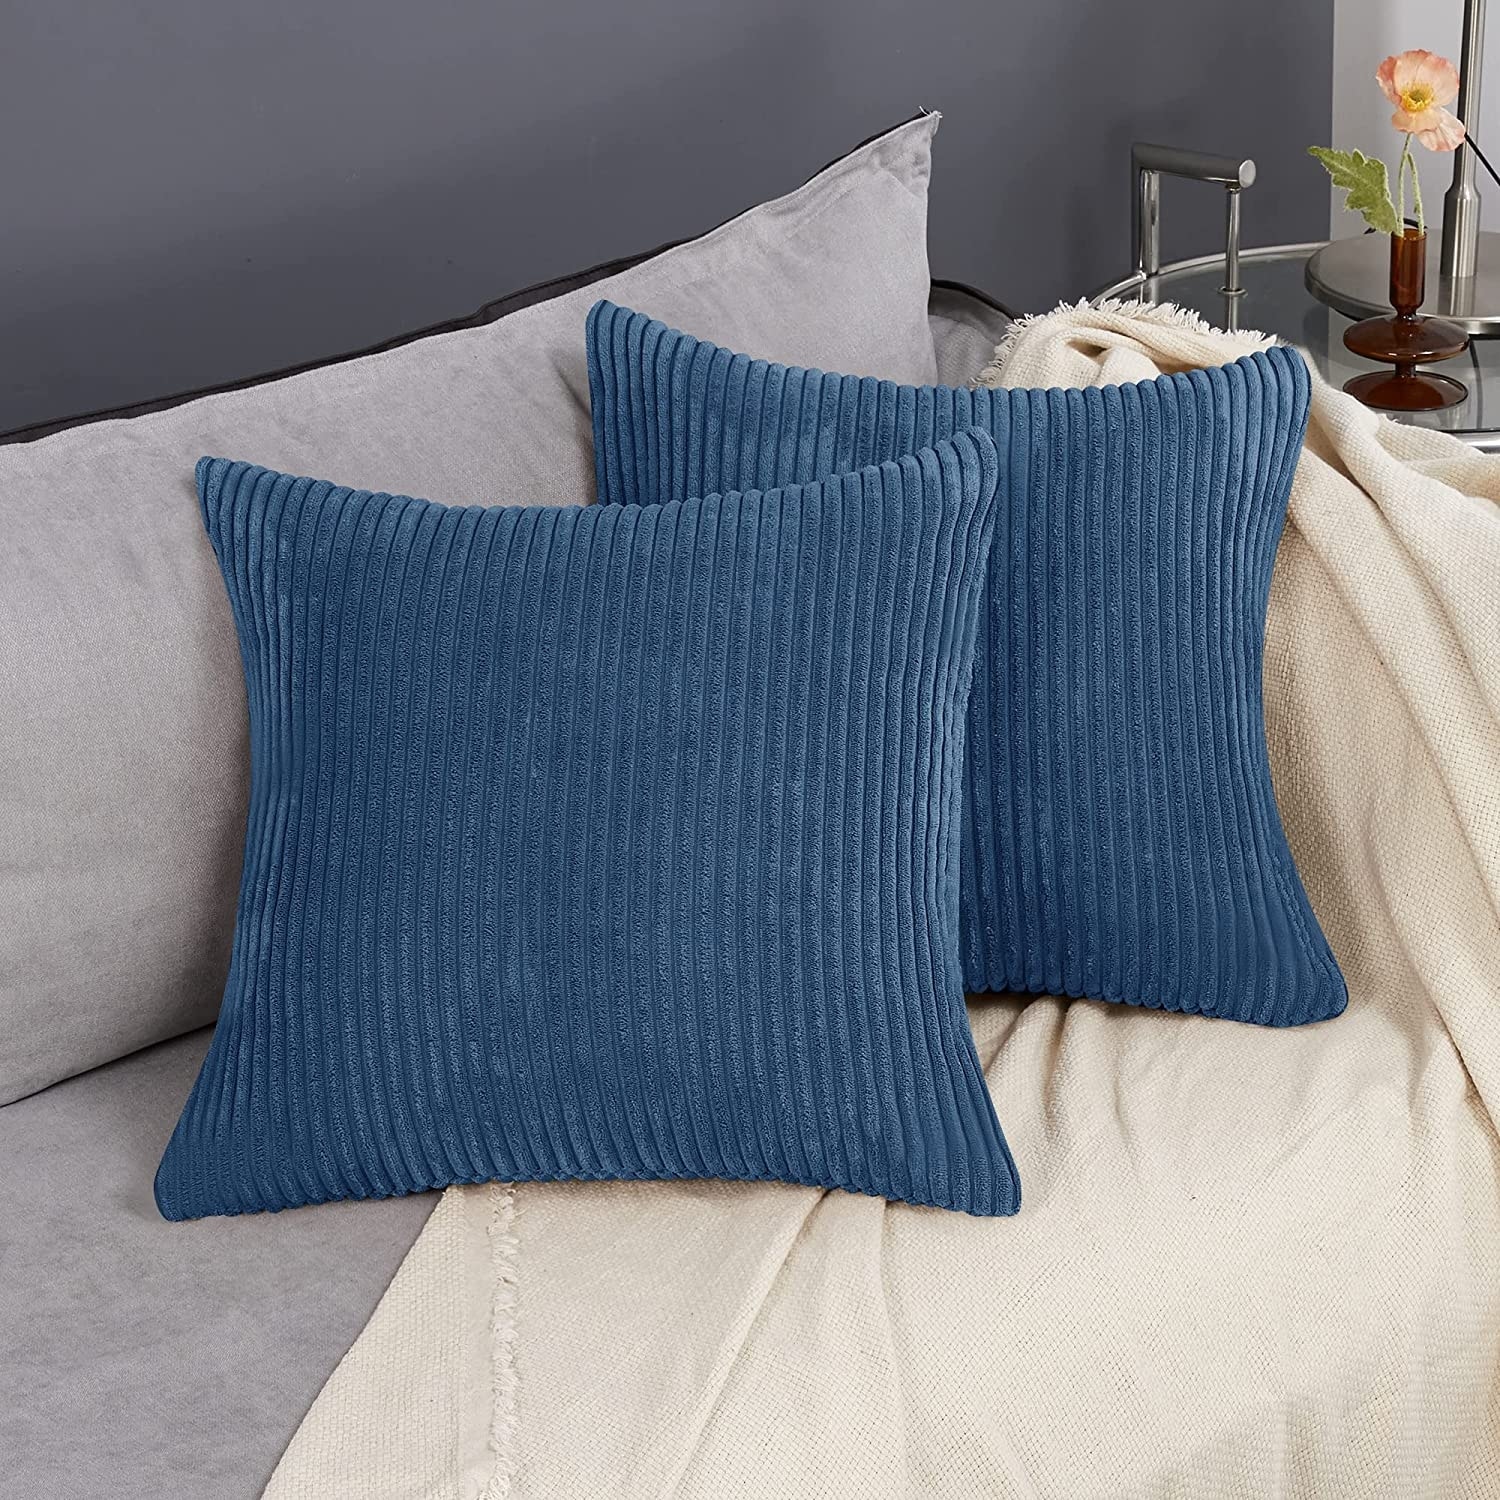 https://ak1.ostkcdn.com/images/products/is/images/direct/ad3427873b03401c393ac03fa4ab7be6cd73d466/Deconovo-Corduroy-Throw-Pillow-Covers-2-PCS%28Cover-Only%29.jpg